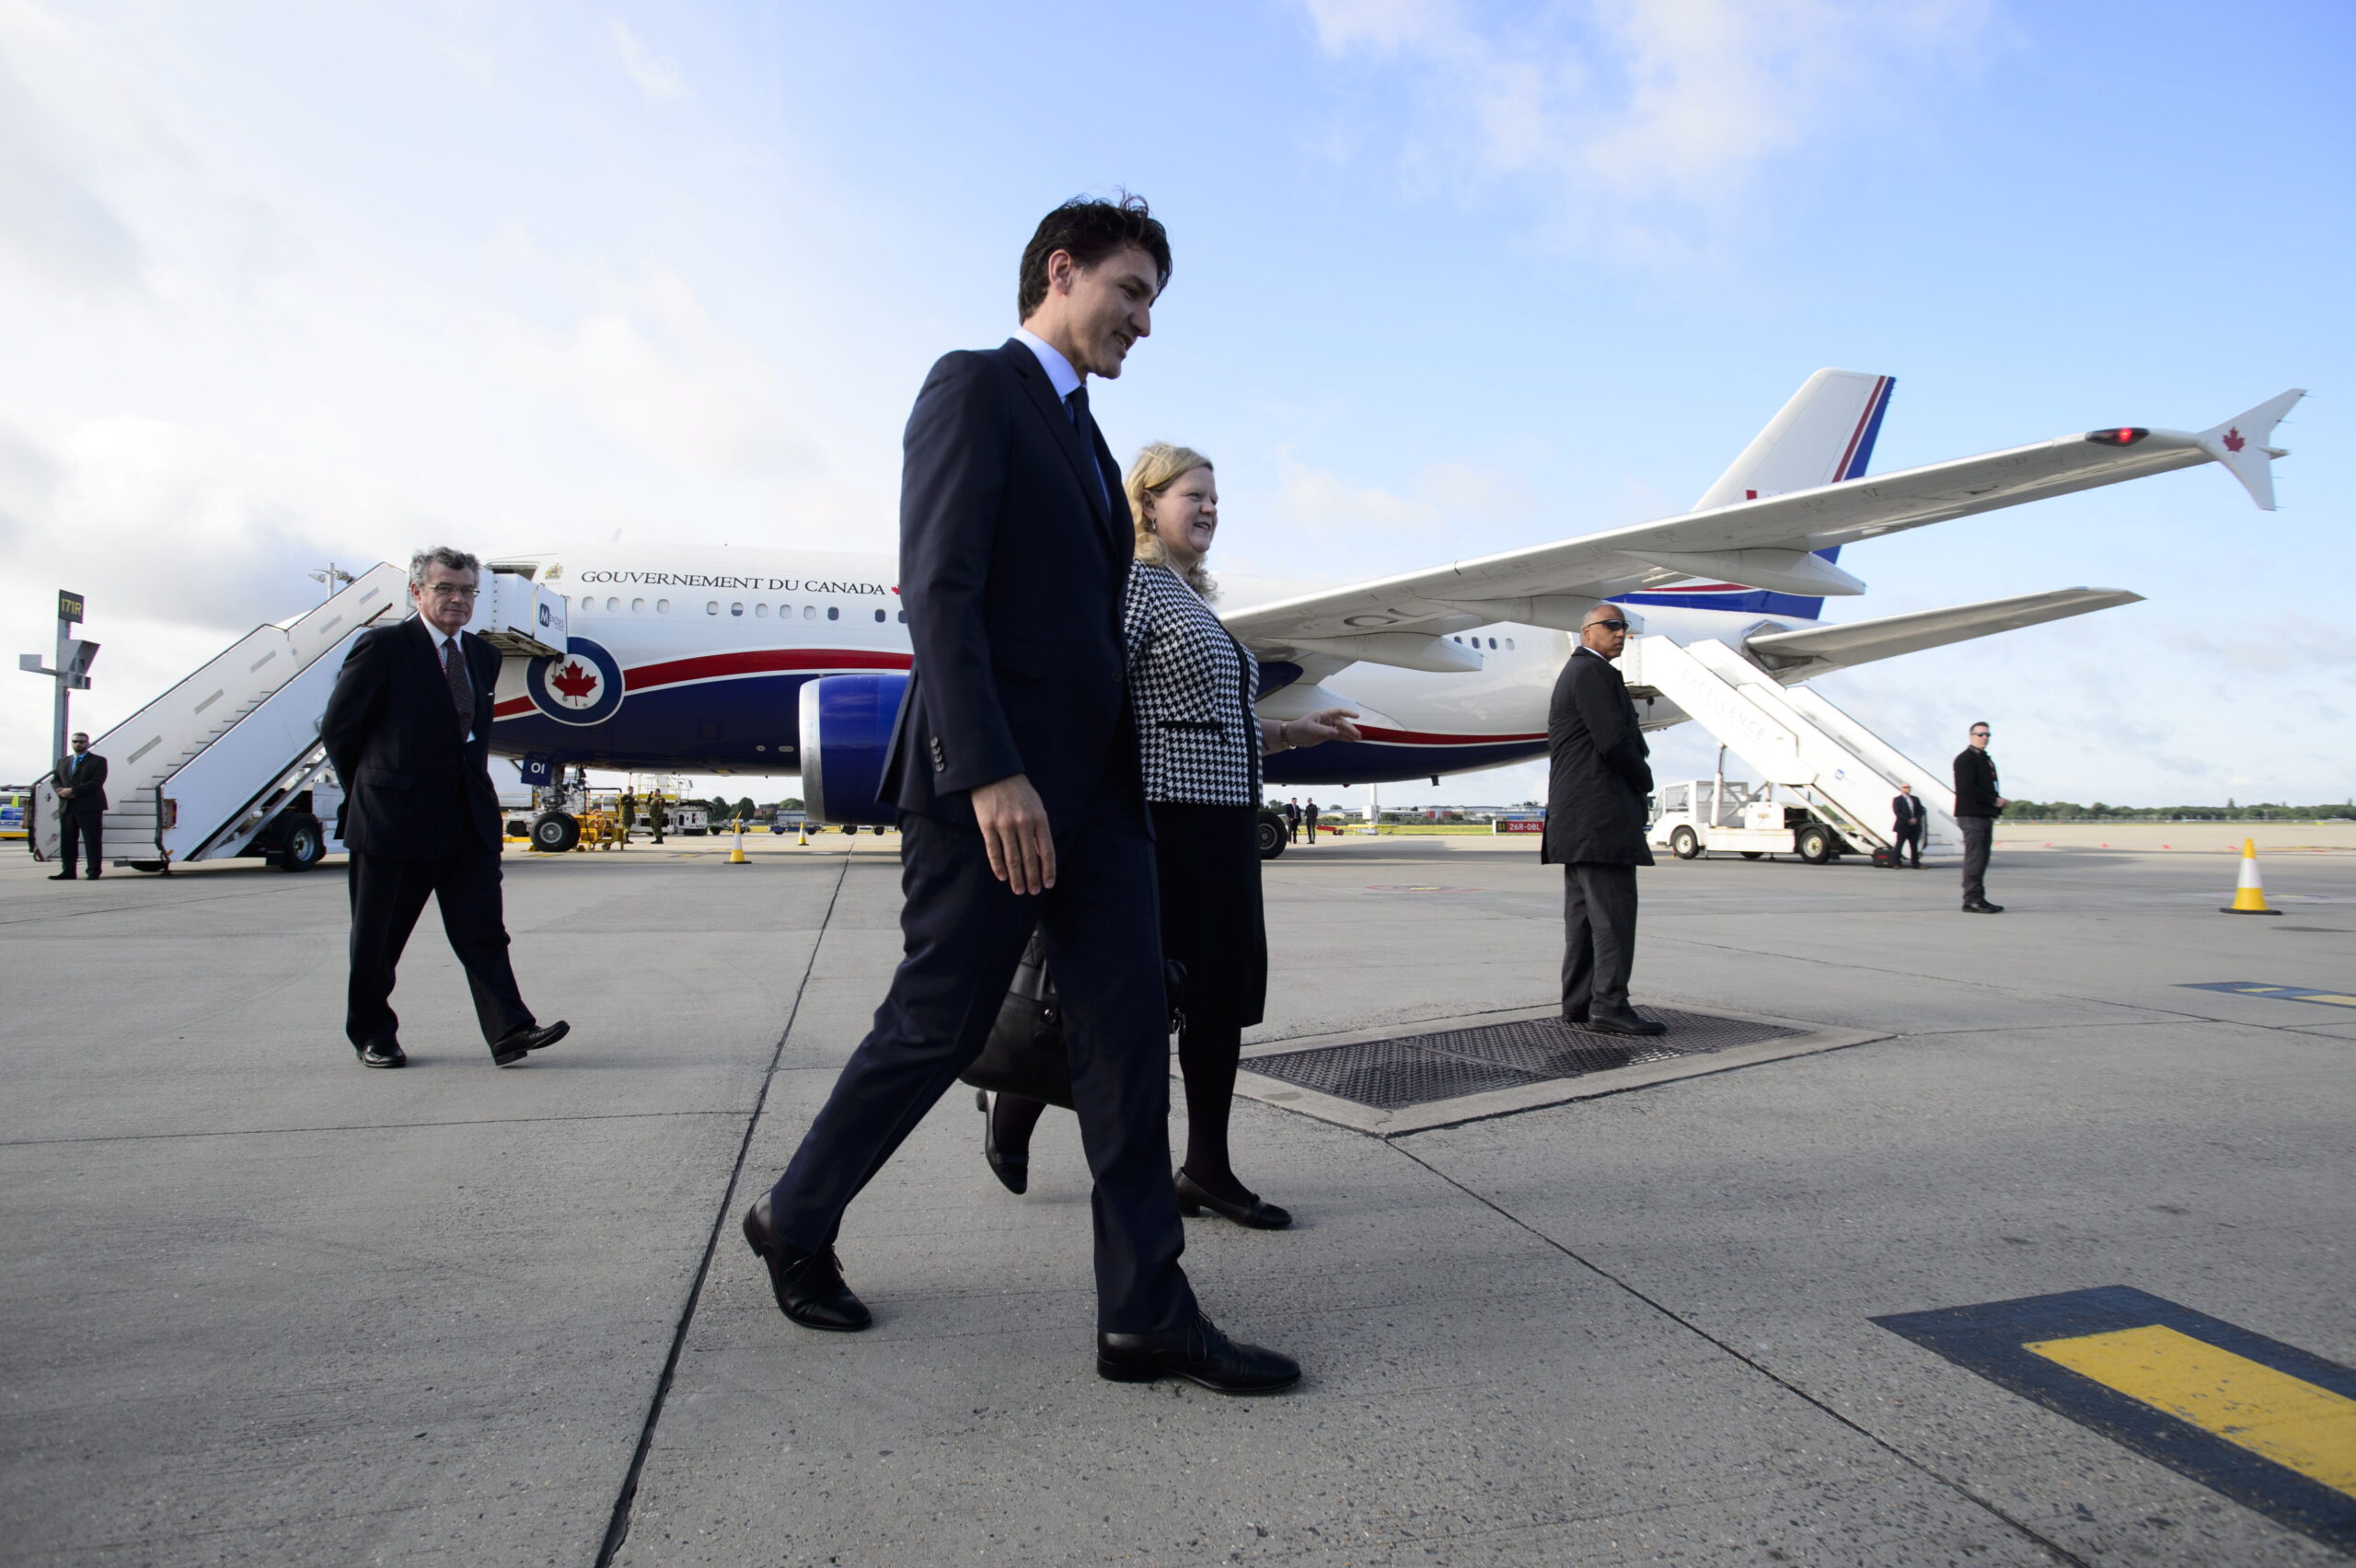 Charette and Trudeau walk side by side, with four men positioned variously around the tarmac with the government jet in the distance, its two stairway ramps in use at the front and back of the plane.